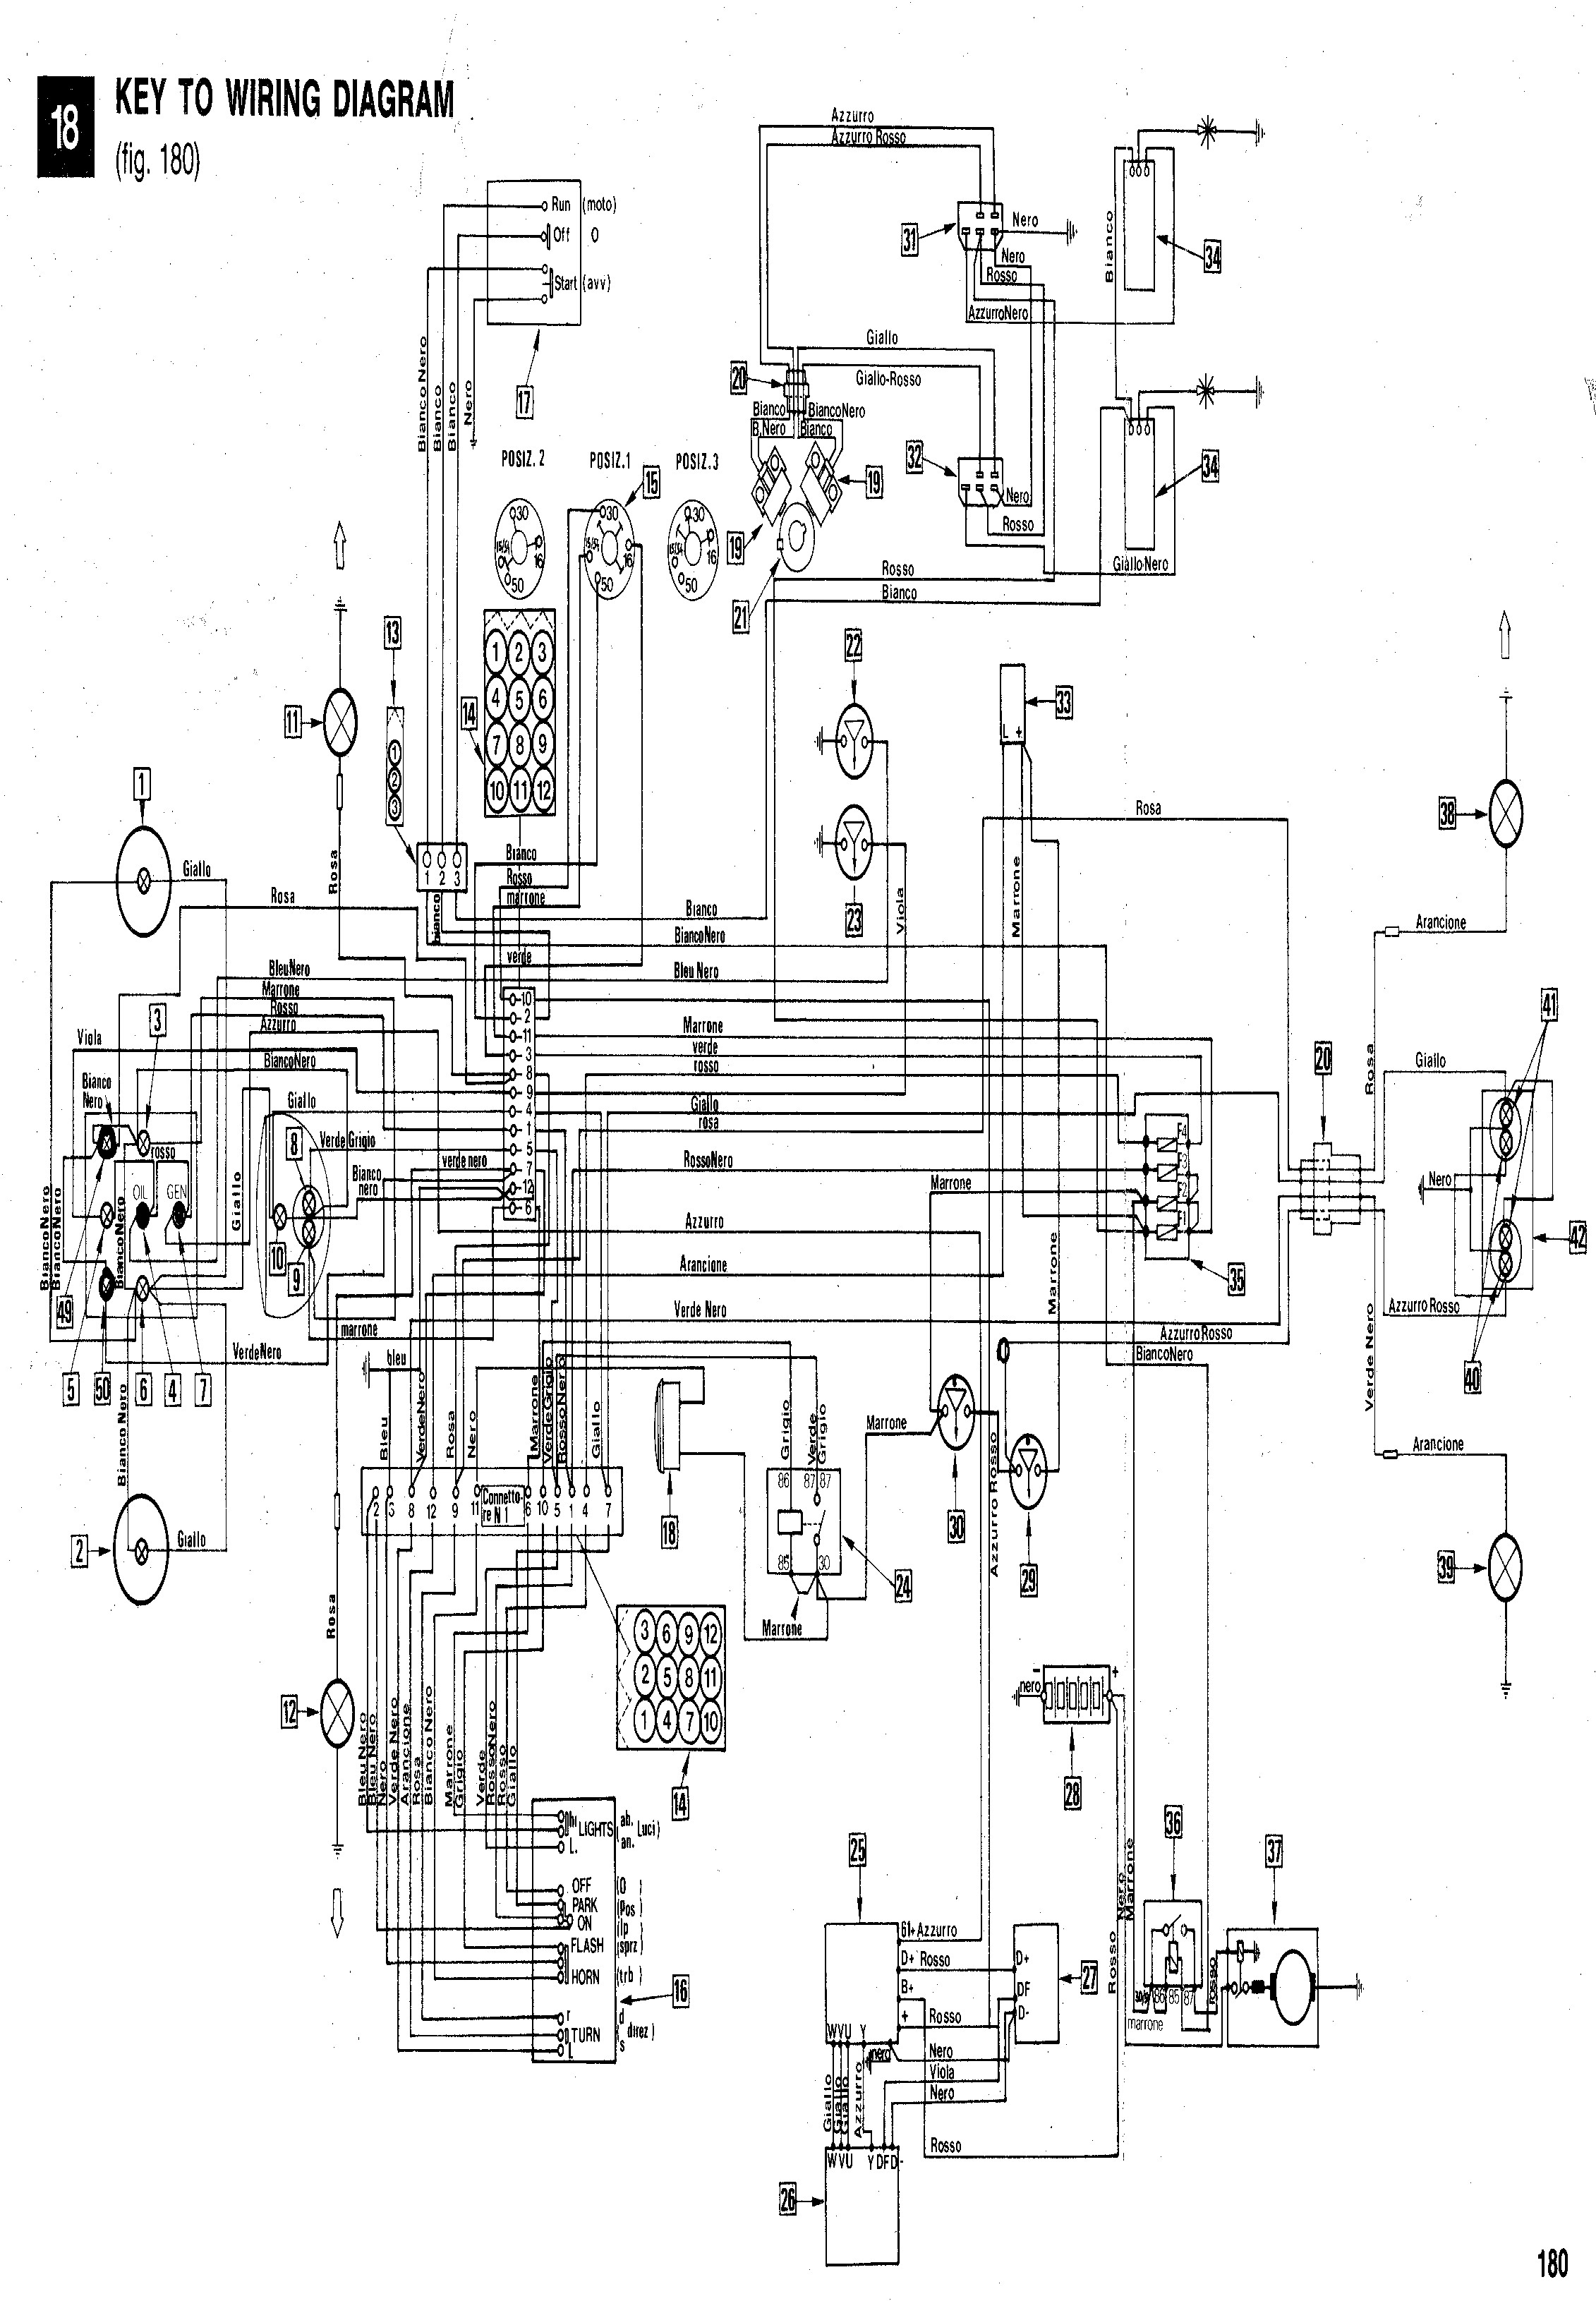 Volvo V50 Engine Diagram Euro Spares the High Performance or at Least Higher Performance Of Volvo V50 Engine Diagram